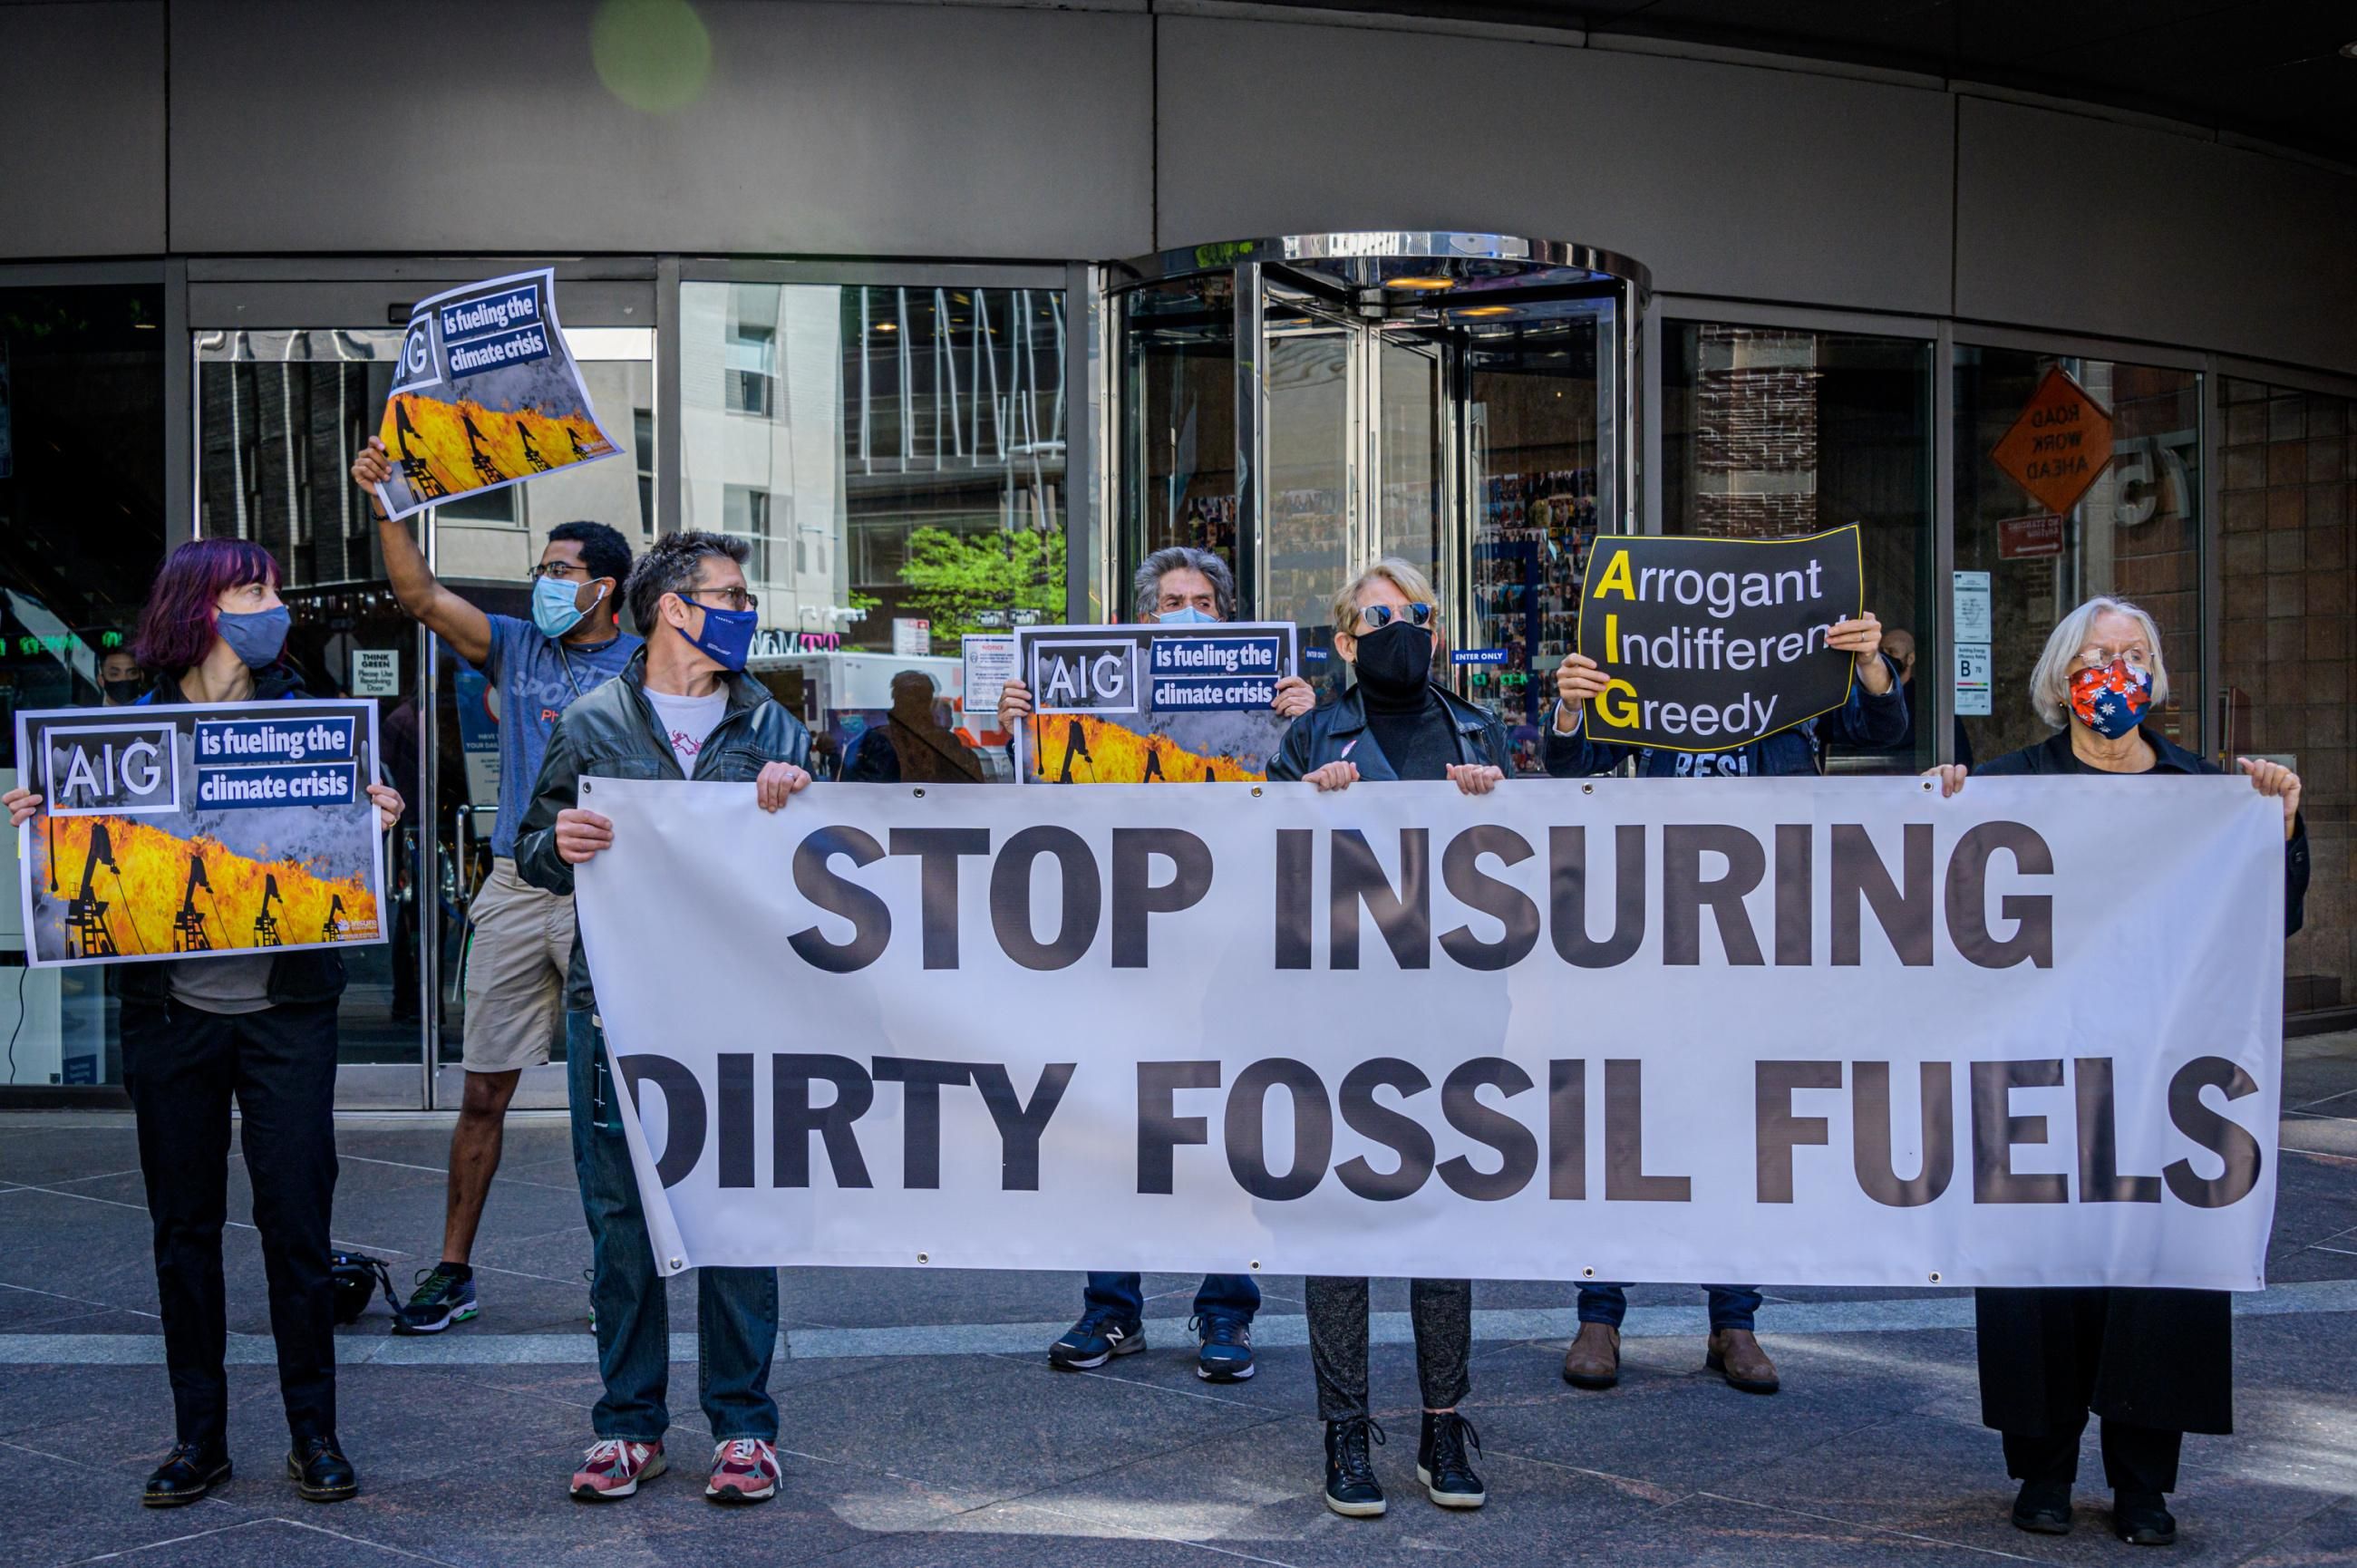 A group of activists, working with the Insure Our Future Network, gathered outside AIG headquarters in Manhattan during their annual shareholder meeting on May 12, 2021 to demand that AIG take action to address the climate crisis. (Photo: Erik McGregor/LightRocket via Getty Images)